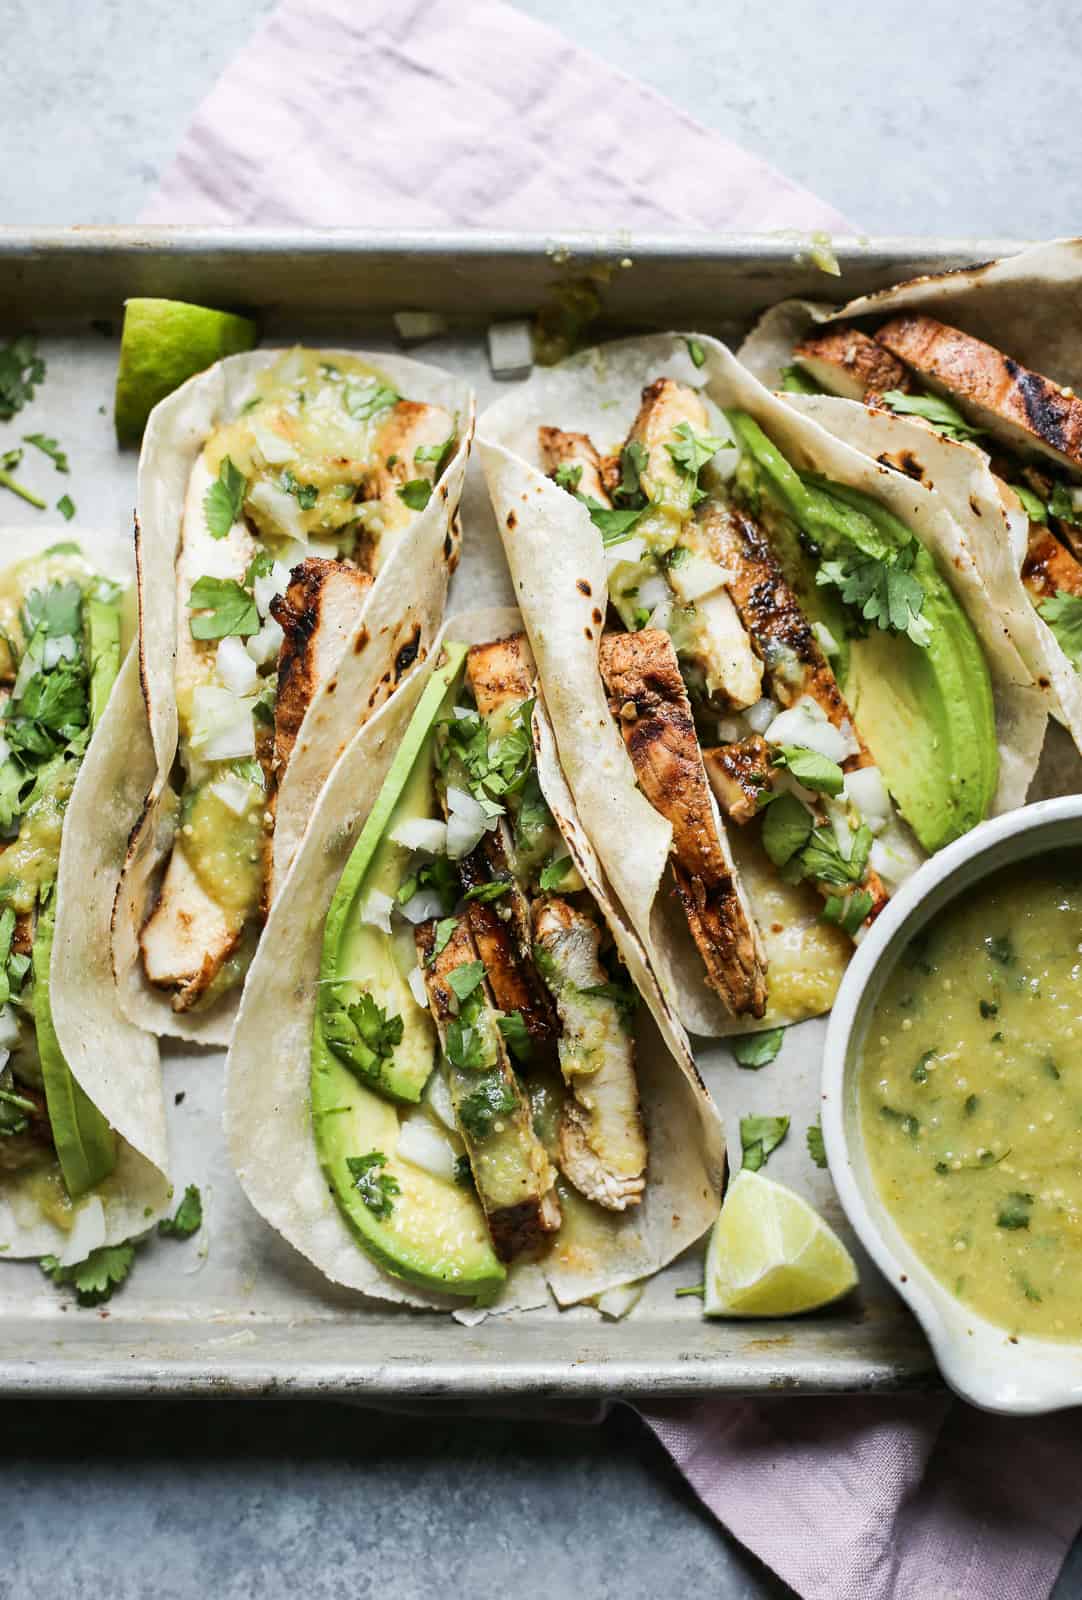 grilled chili chicken tacos with tomatillo salsa